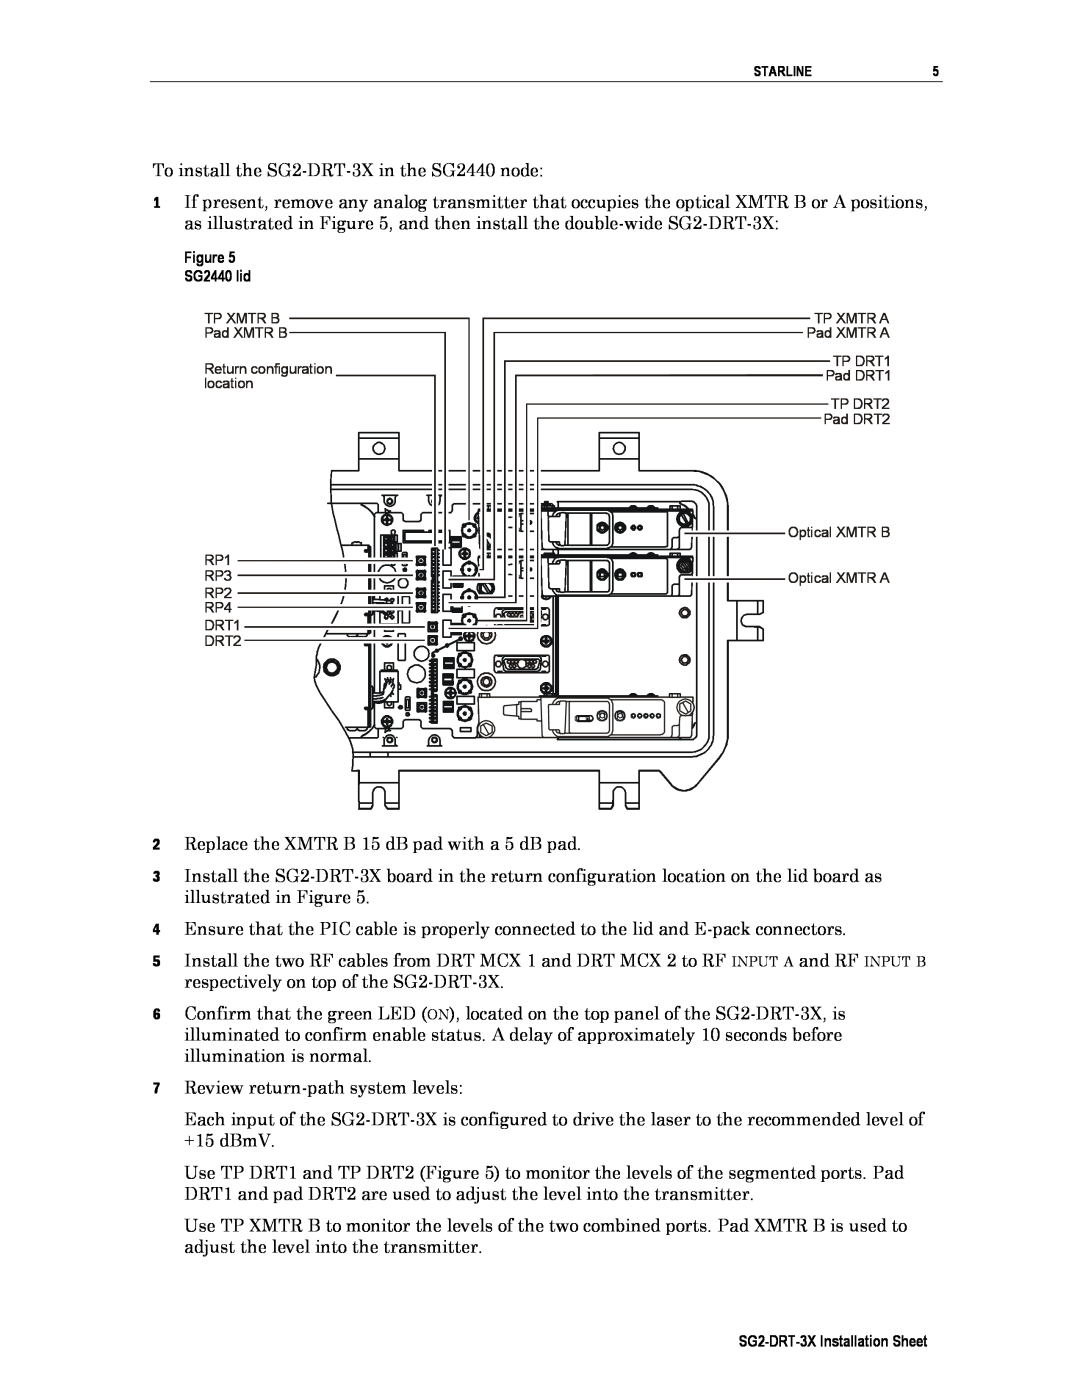 Cuisinart operation manual To install the SG2-DRT-3Xin the SG2440 node 